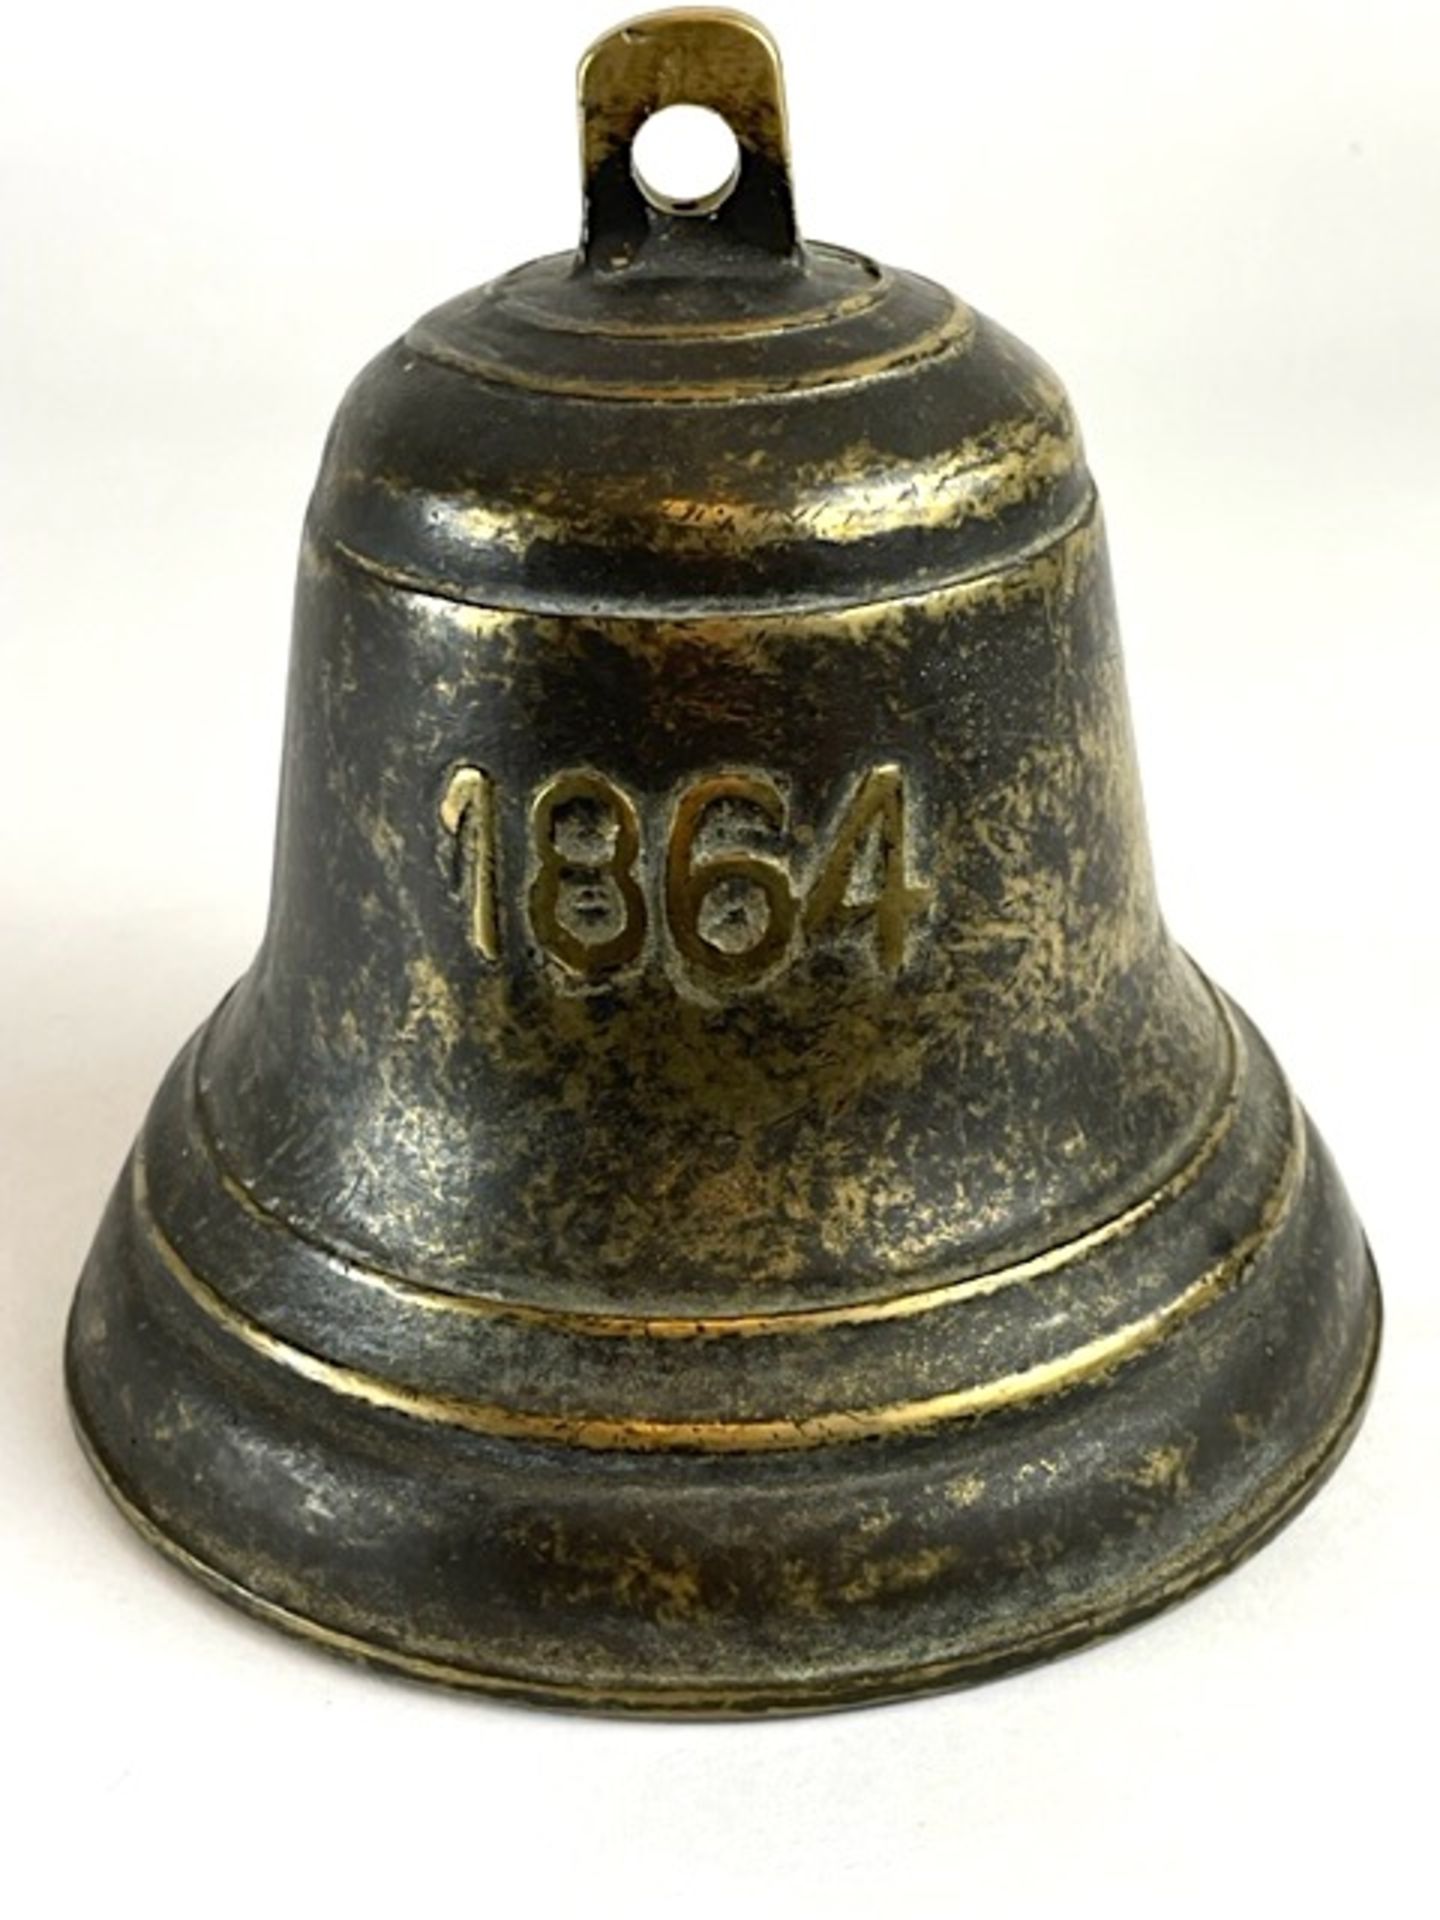 Ship's bell - Image 7 of 11